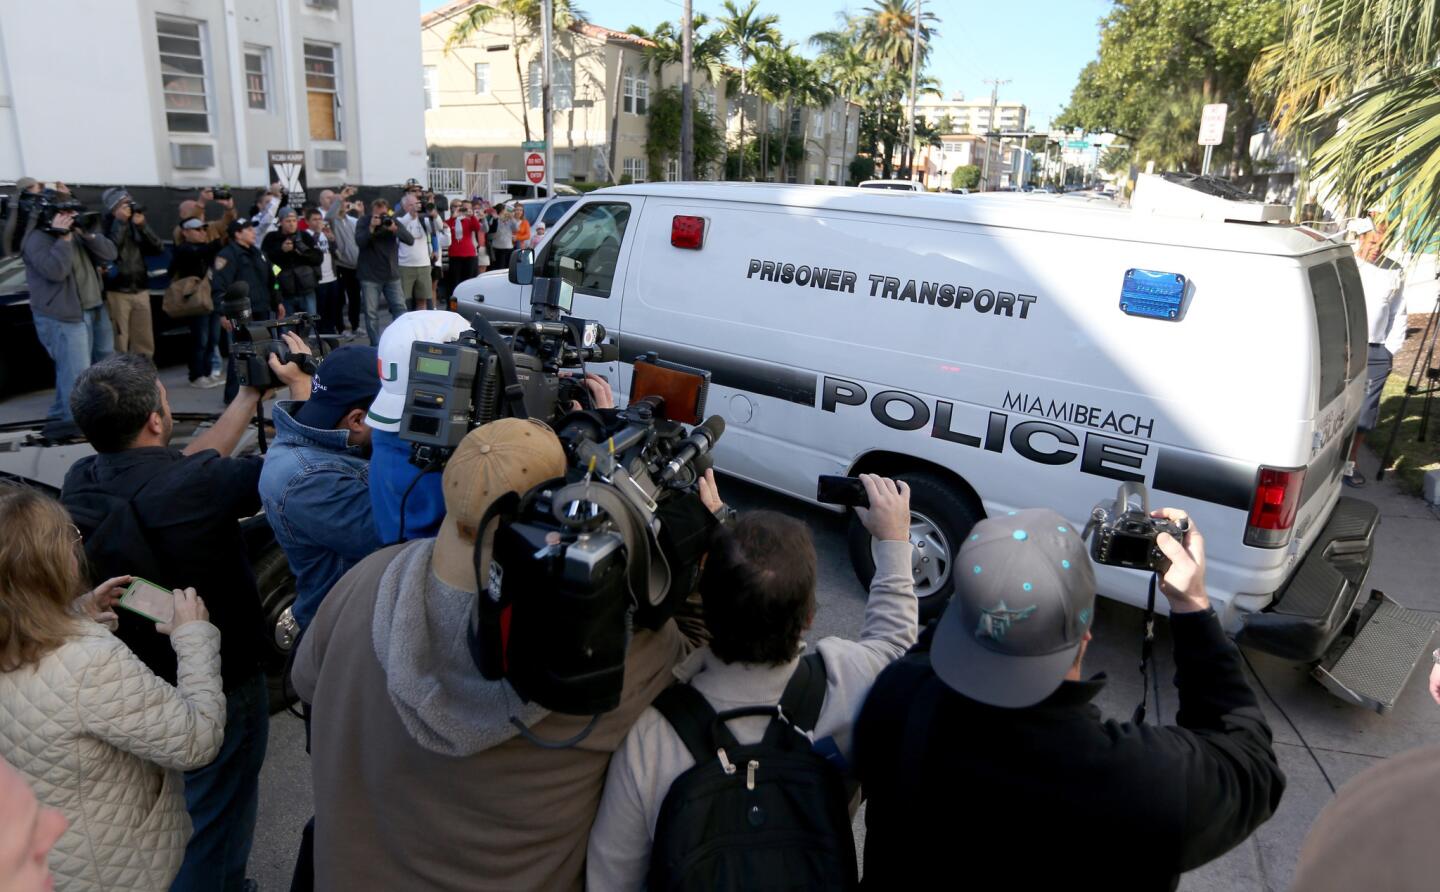 A police van leaves the Miami Beach, Fla., police station to take singer Justin Bieber to jail.